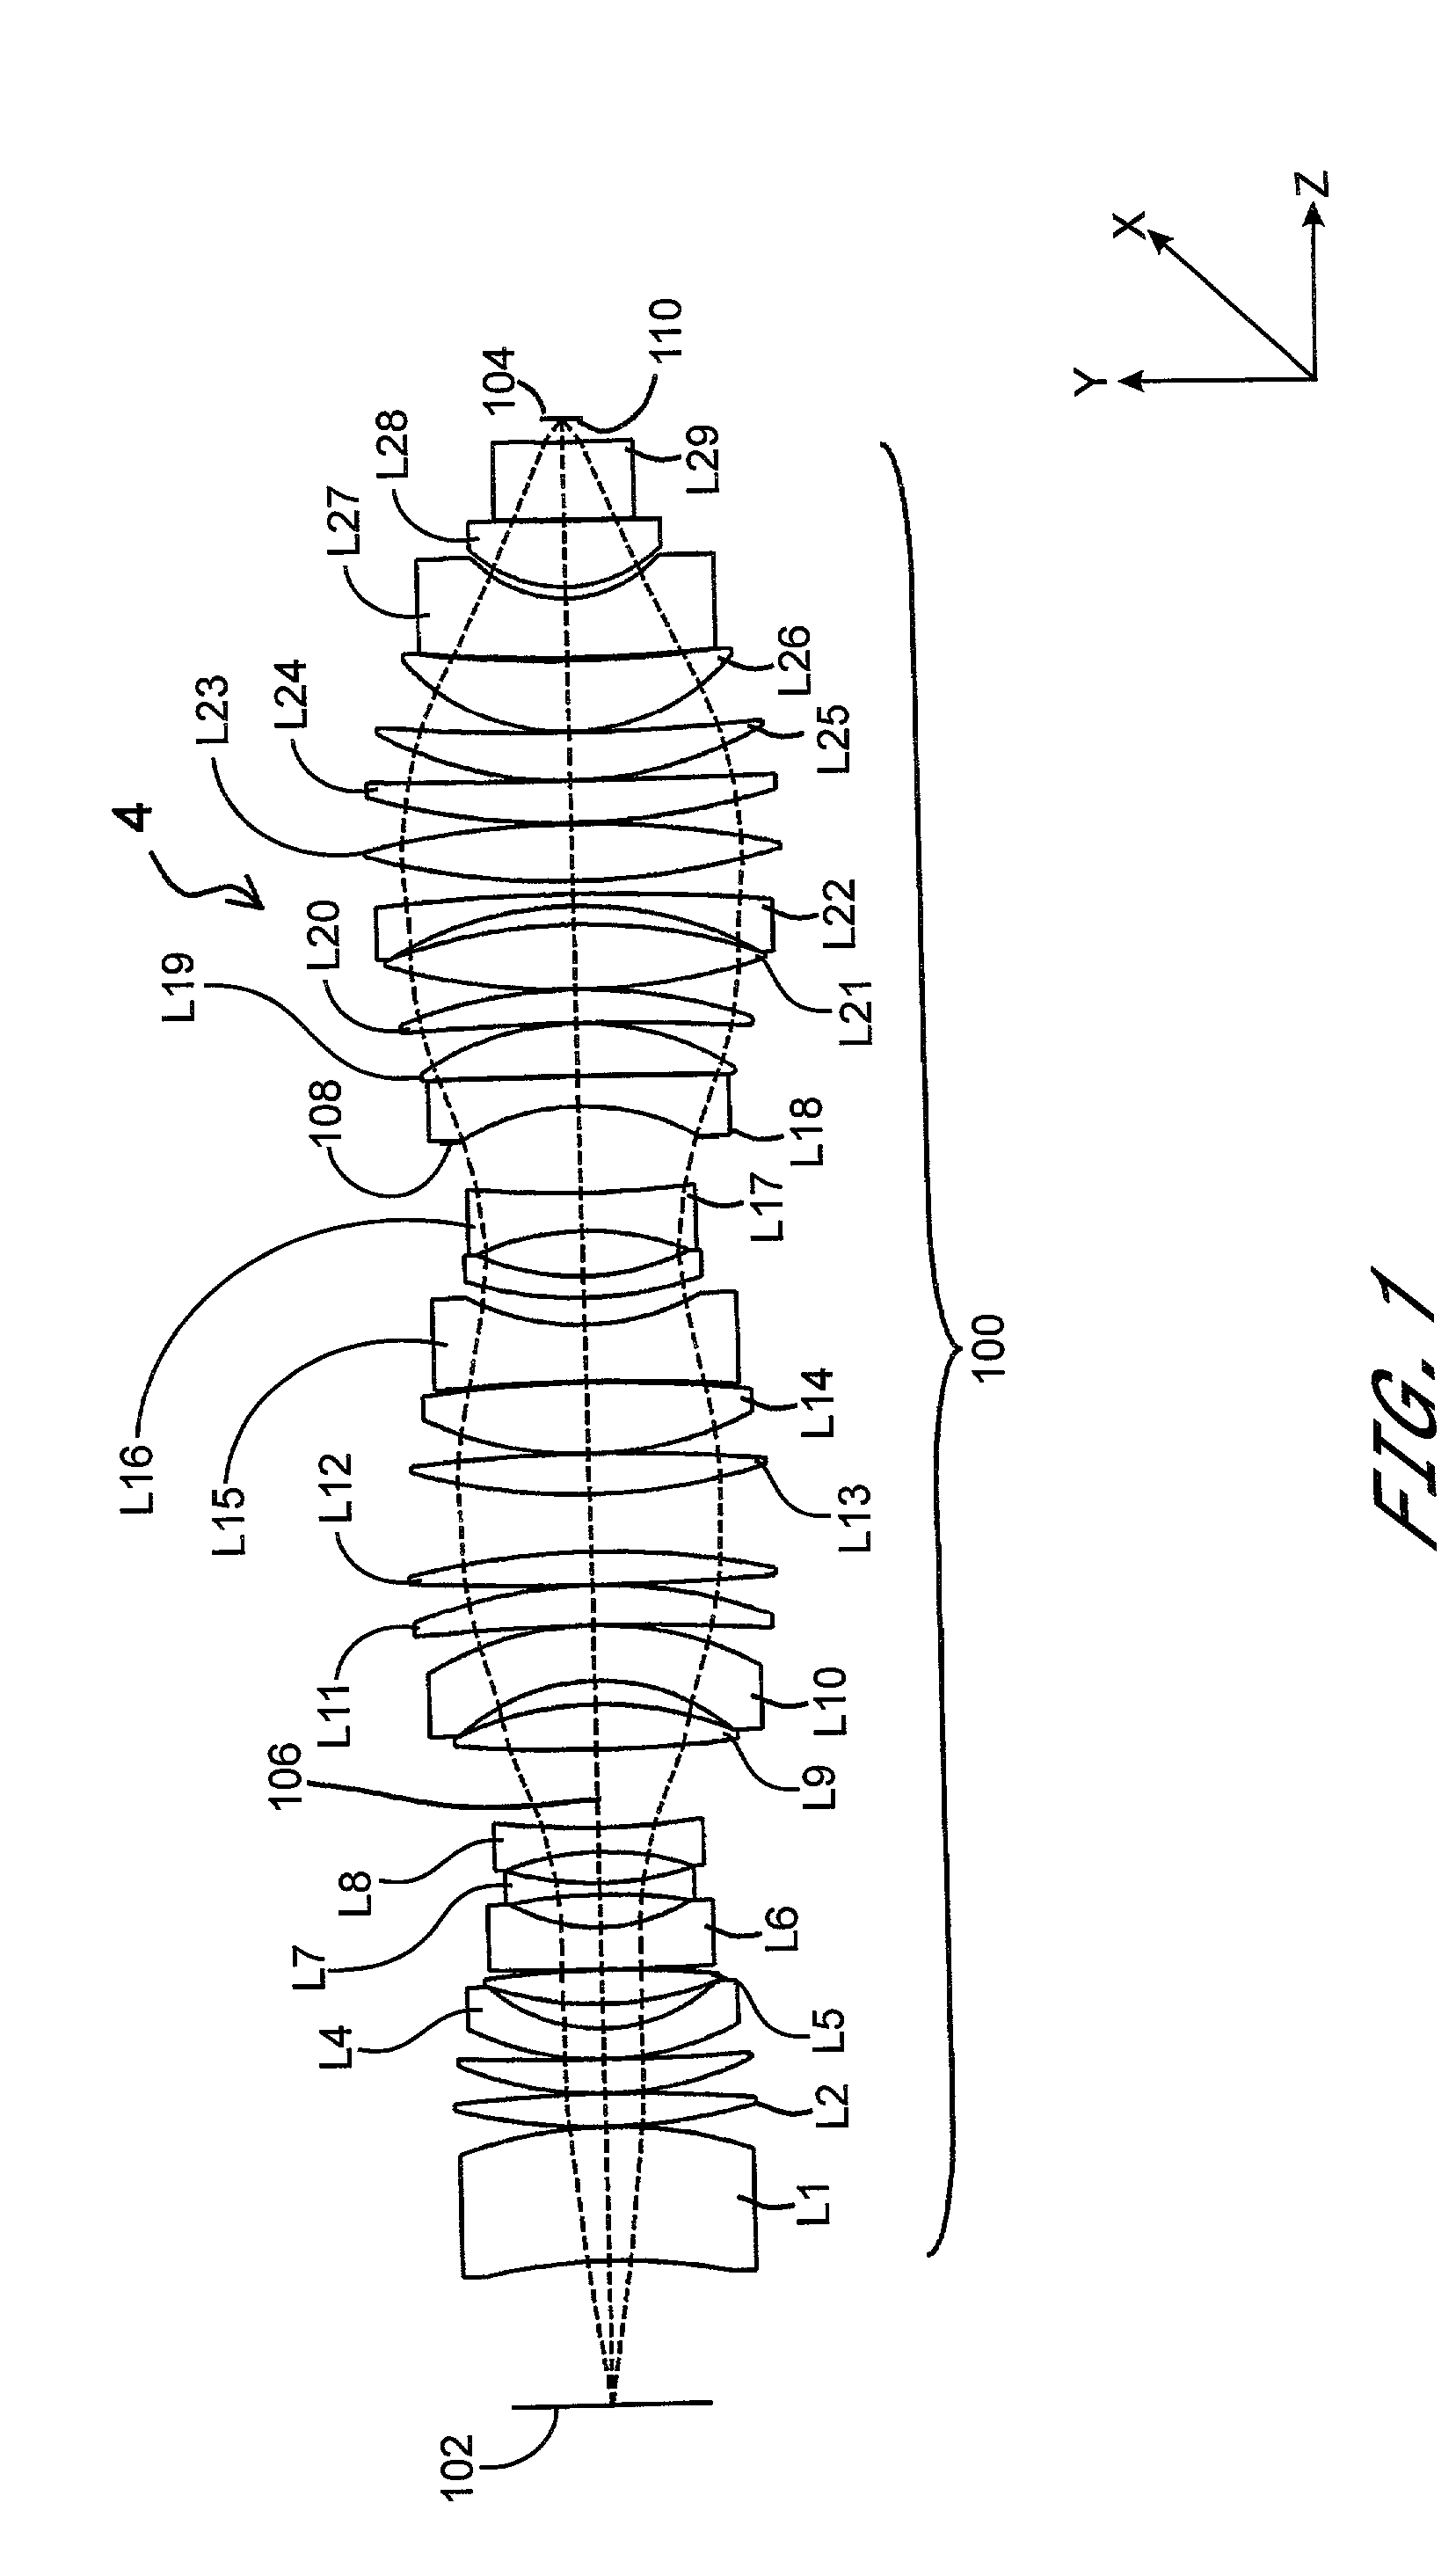 Methods for reducing aberration in optical systems